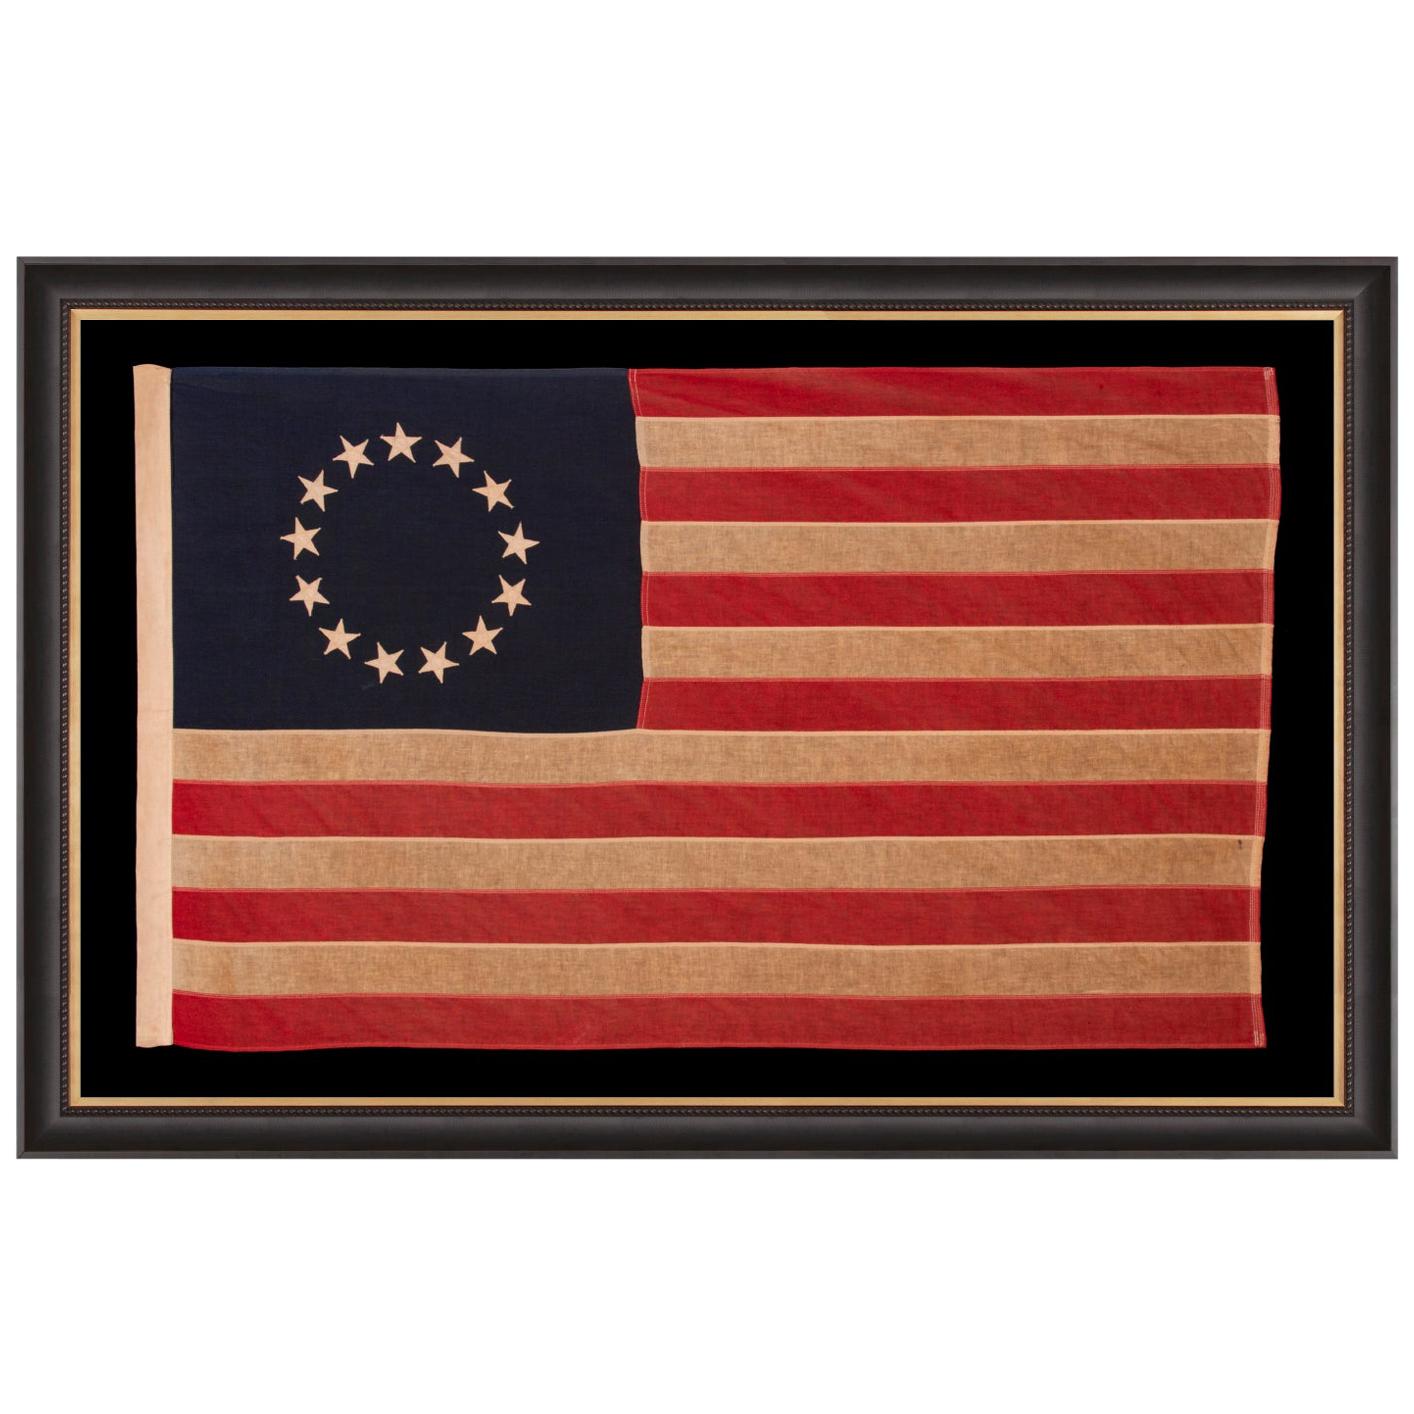 13 Star American Flag with Stars Sewn in the Betsy Ross Pattern